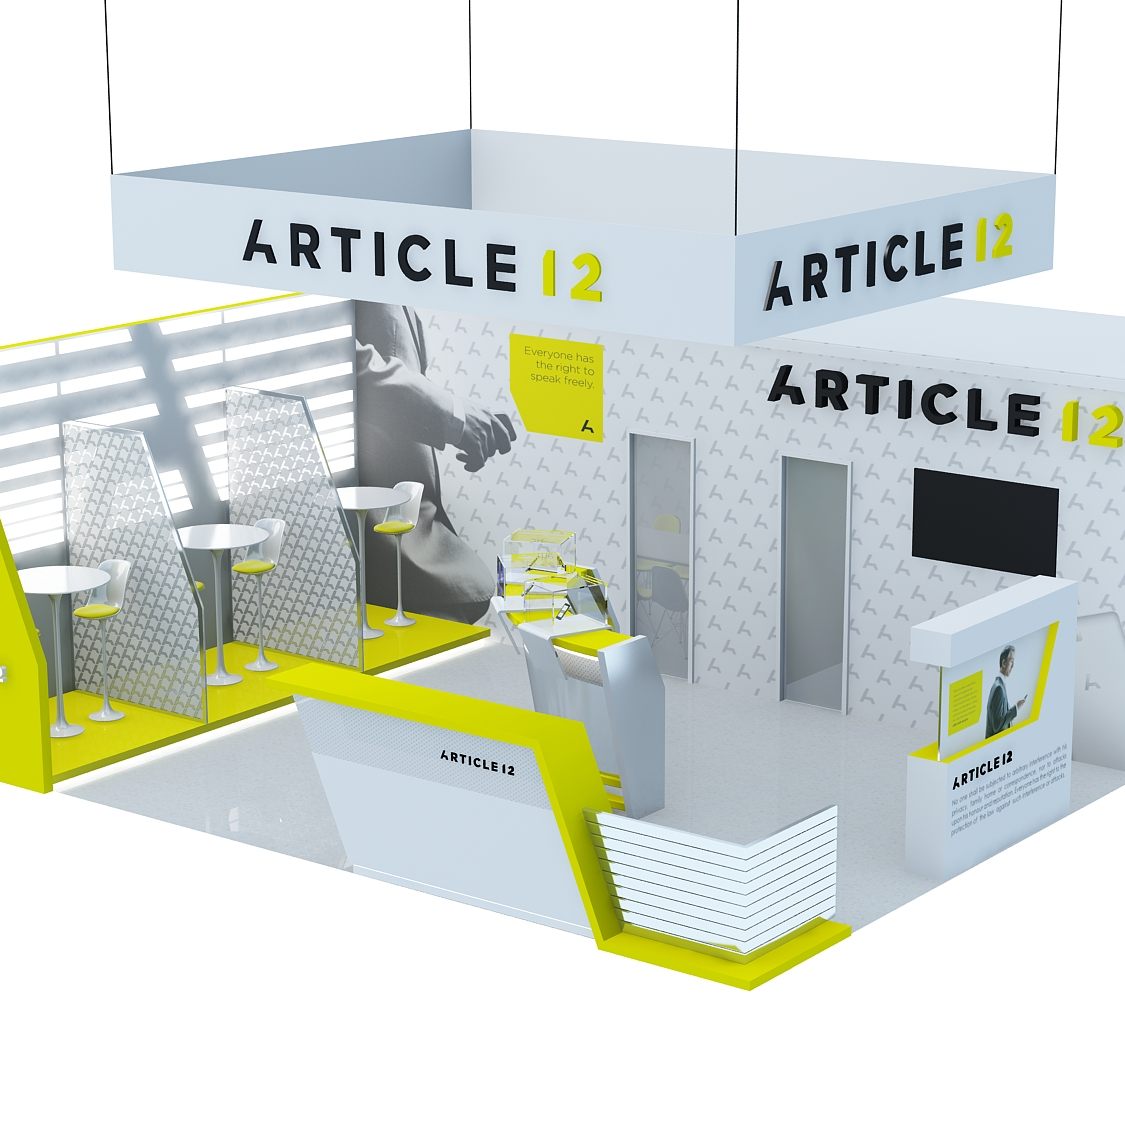 Artical 12 booth